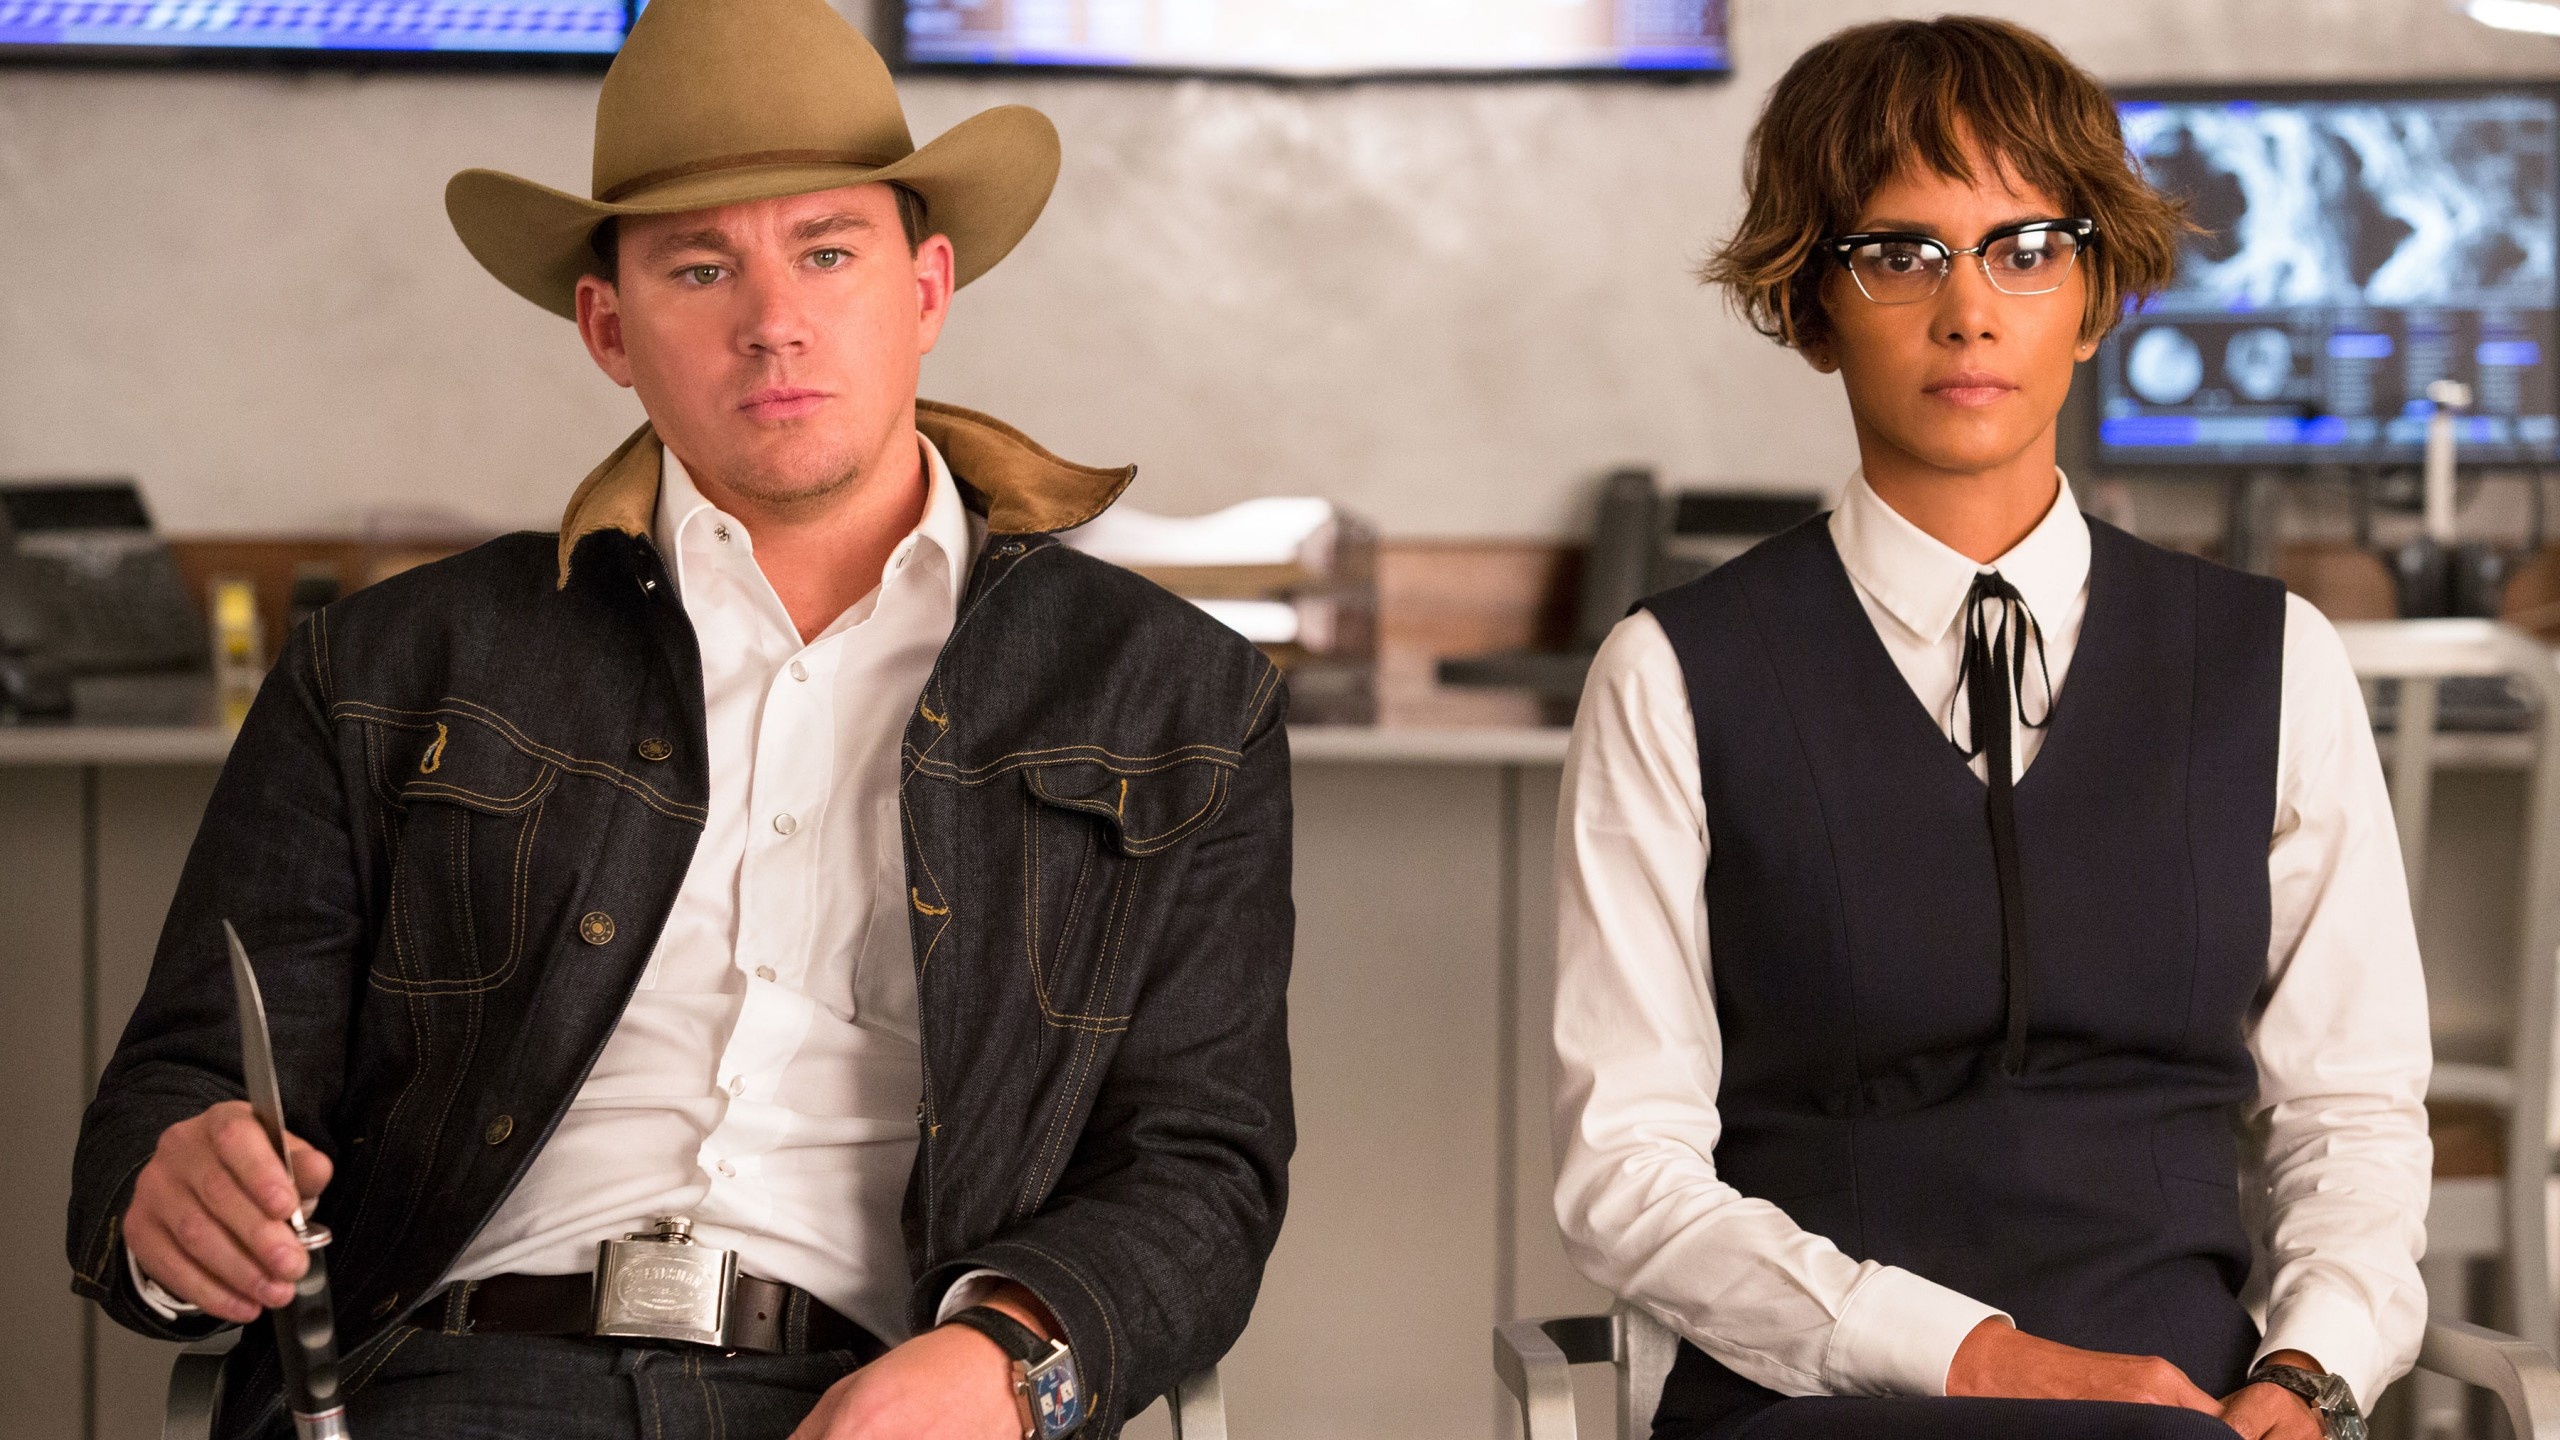 Halle Berry: The cast of Kingsman: The Golden Circle, Channing Tatum as Agent Tequila. 2560x1440 HD Wallpaper.